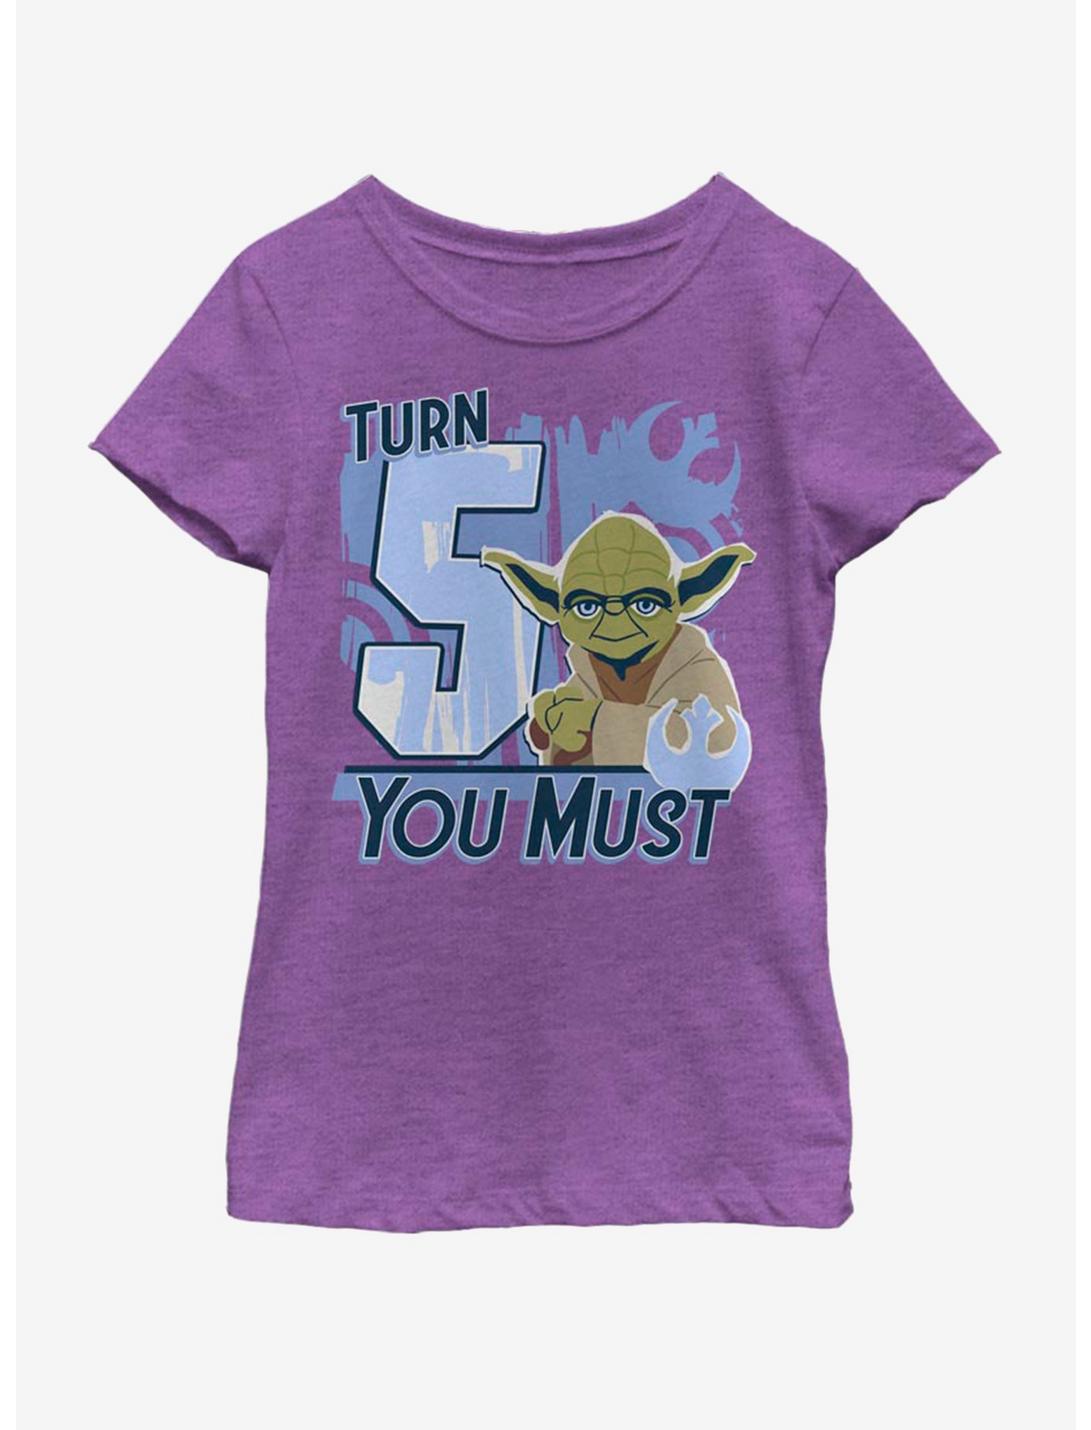 Star Wars Turn 5 You Must Youth Girls T-Shirt, PURPLE BERRY, hi-res